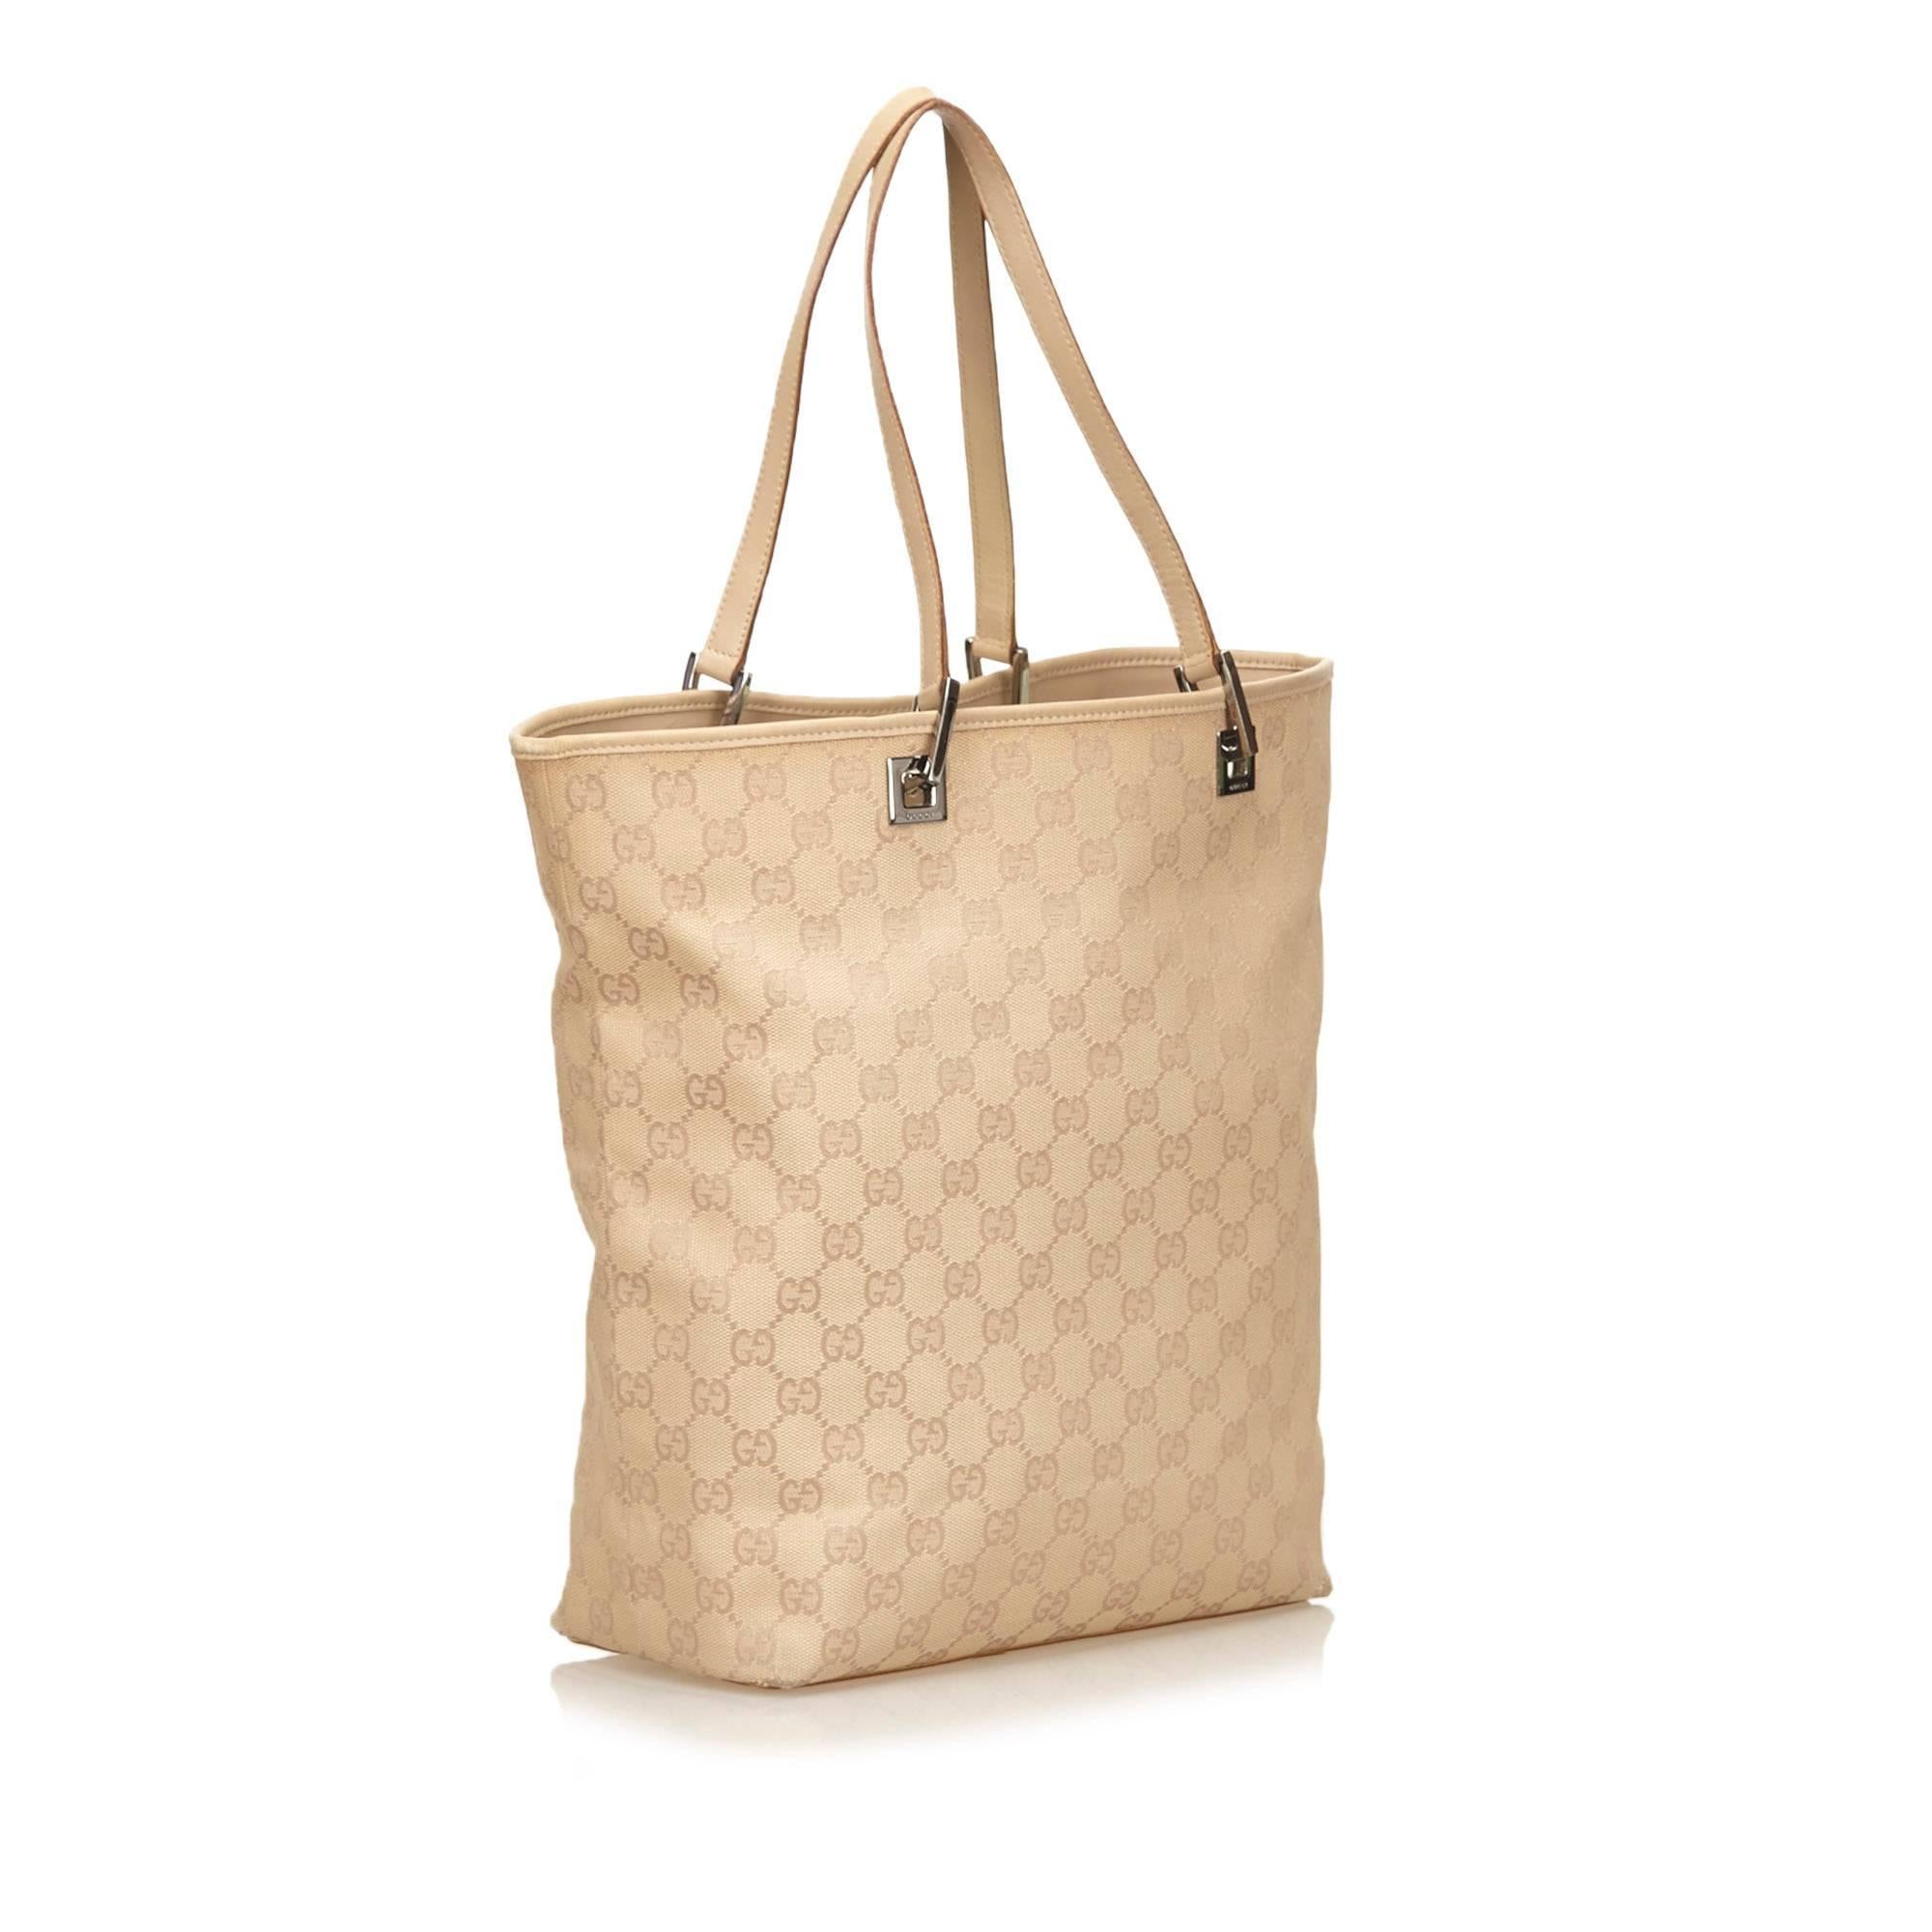 The Cambon Ligne Bucket Tote features a quilted lambskin leather body and interlocking Cs, rolled leather handles, an exterior back slip pocket, a top zip closure, and an interior zip pocket.

Color: Beige